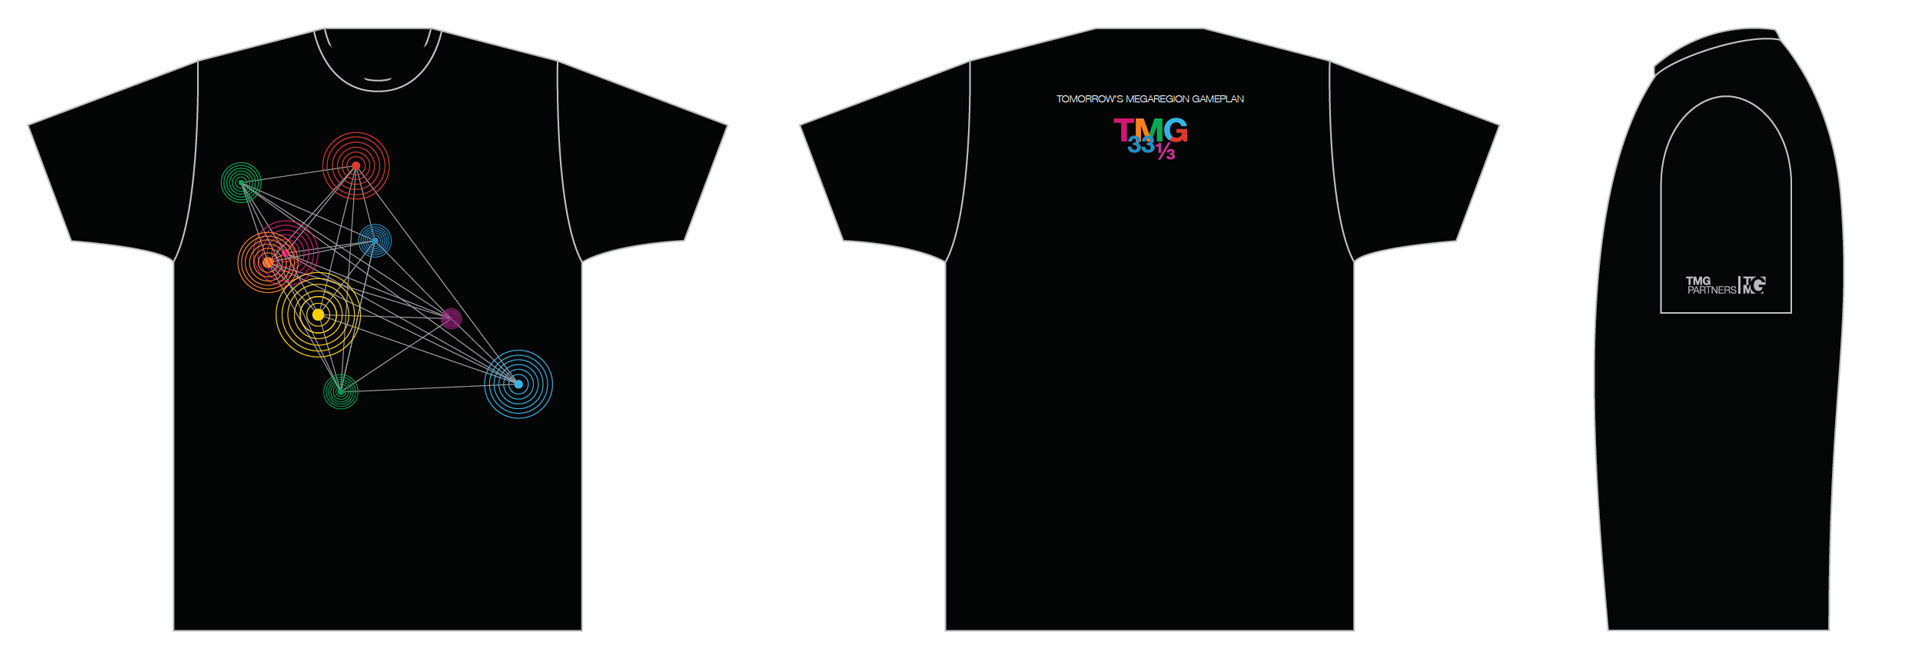 Design showing front, back and sleeve of a black t-shirt with event logo and connected rings design.